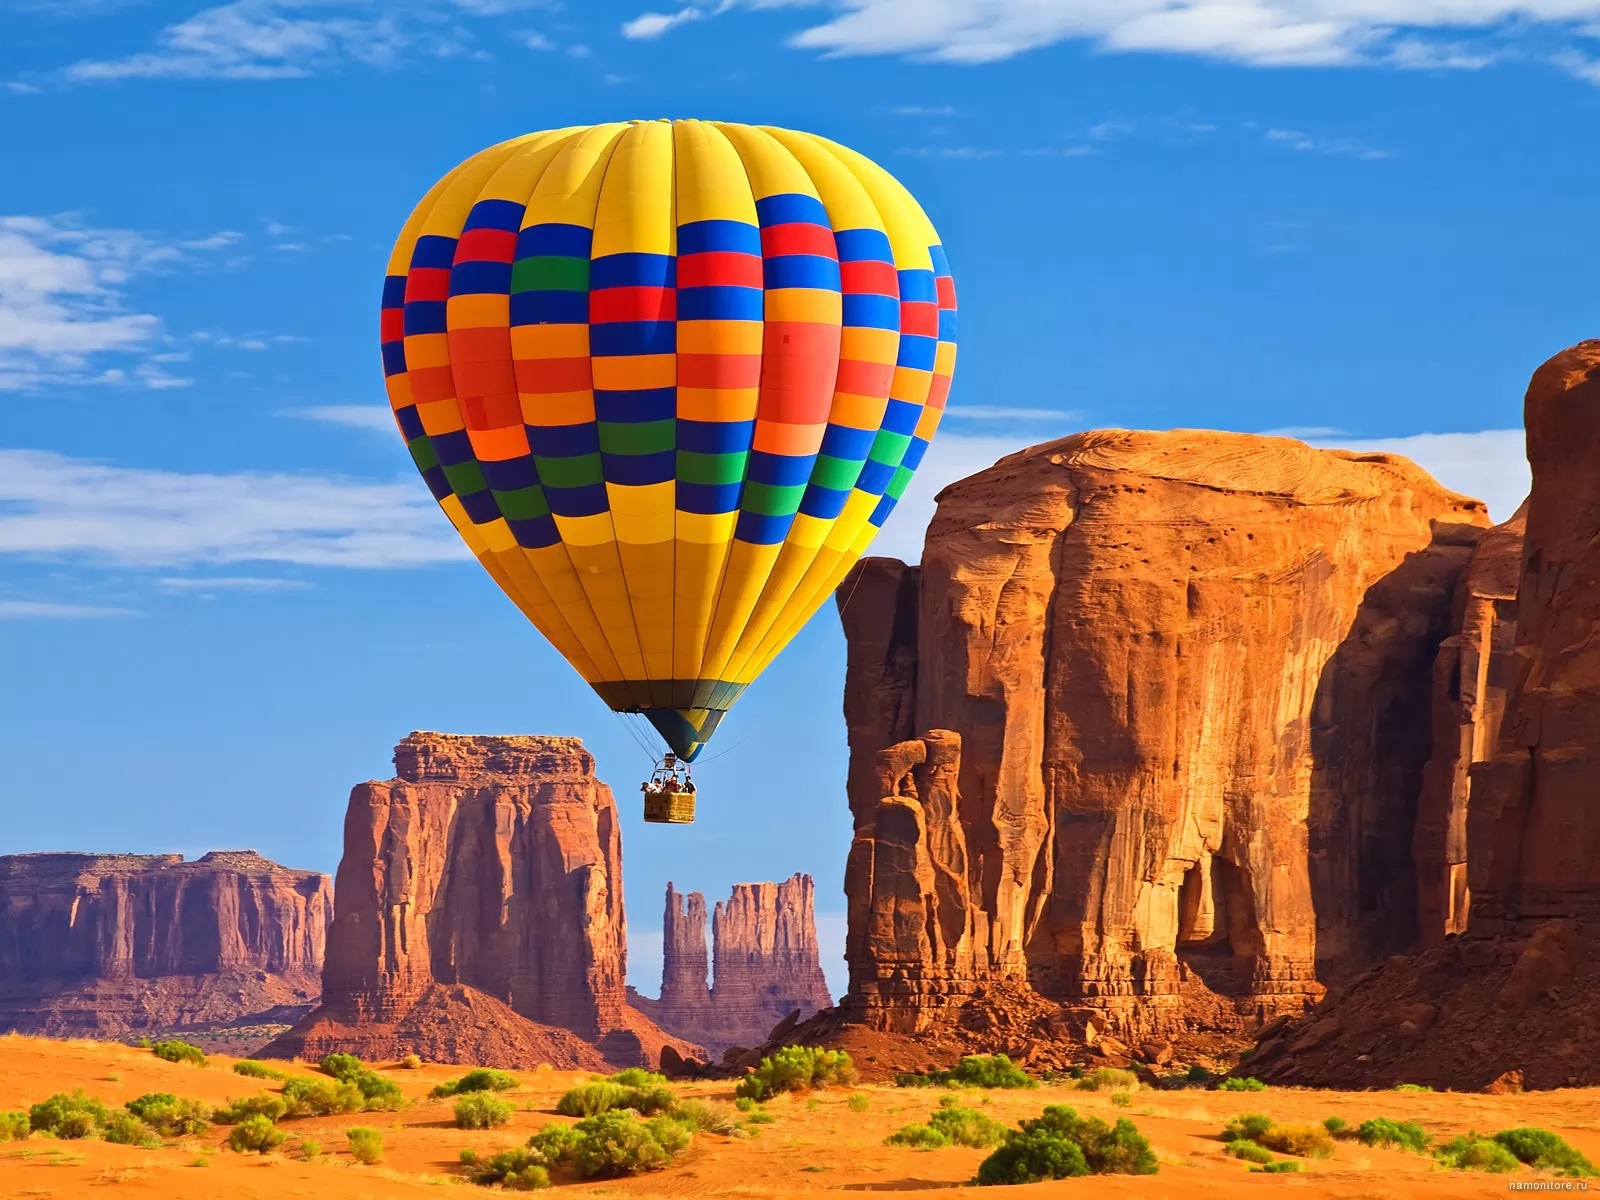 Arizona, the Valley of monuments, America, balloons, canyon, flight, landscapes, nature x